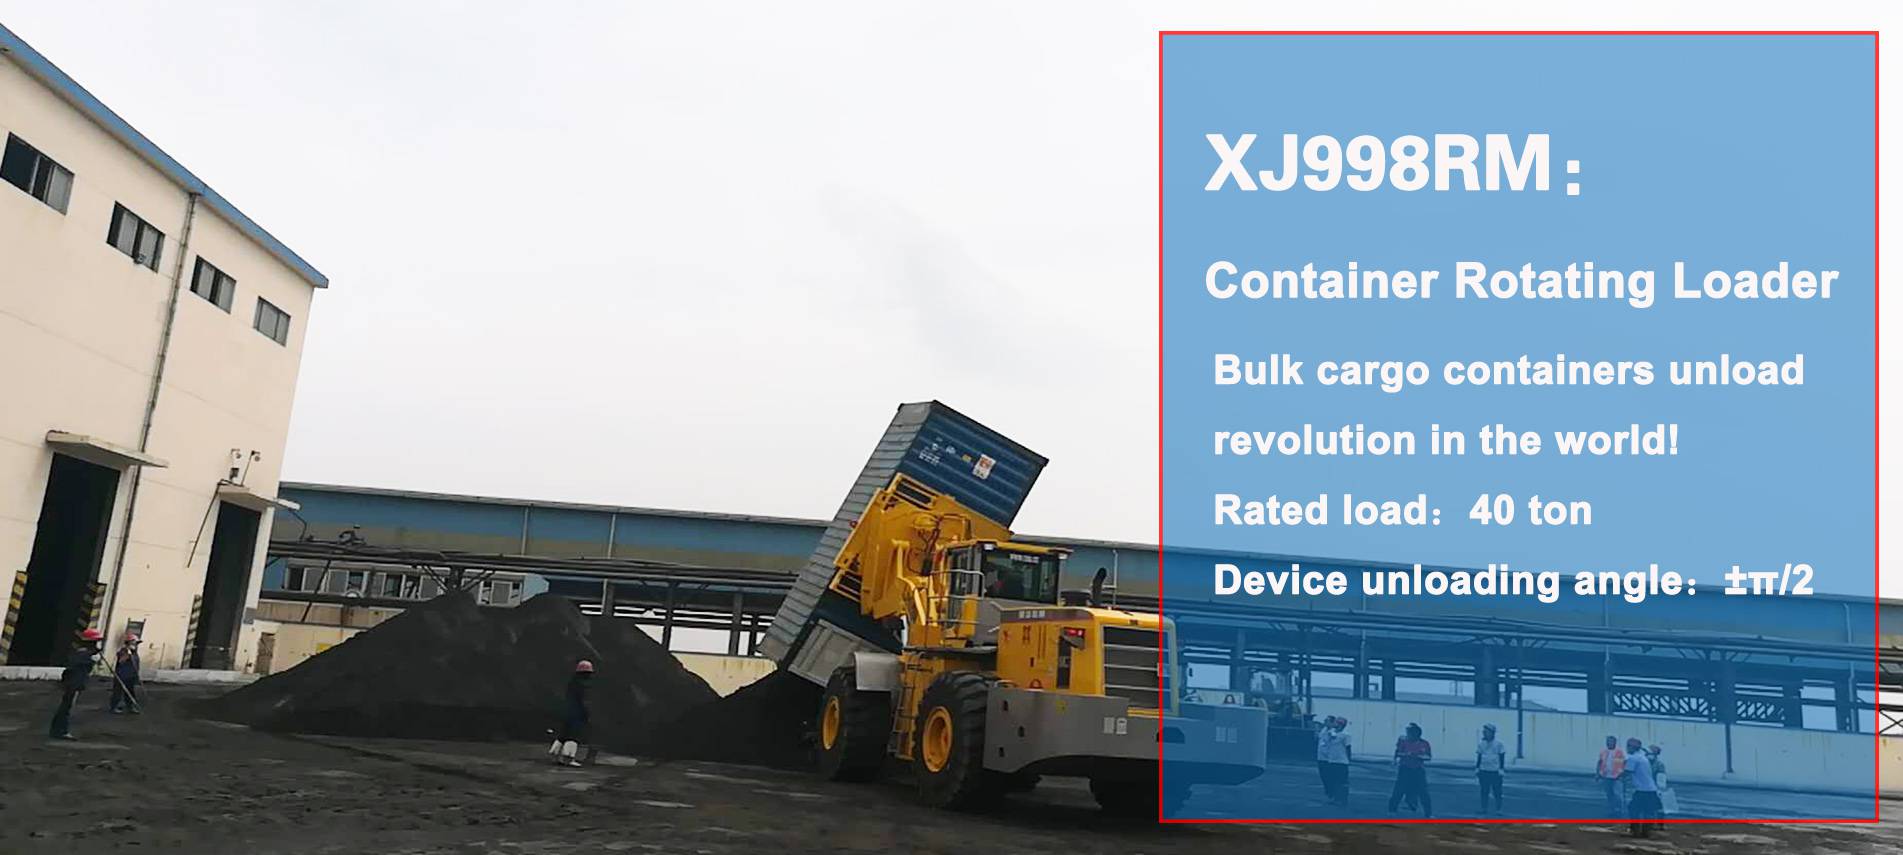 XJ998RM CONTAINER ROTATING LOADER